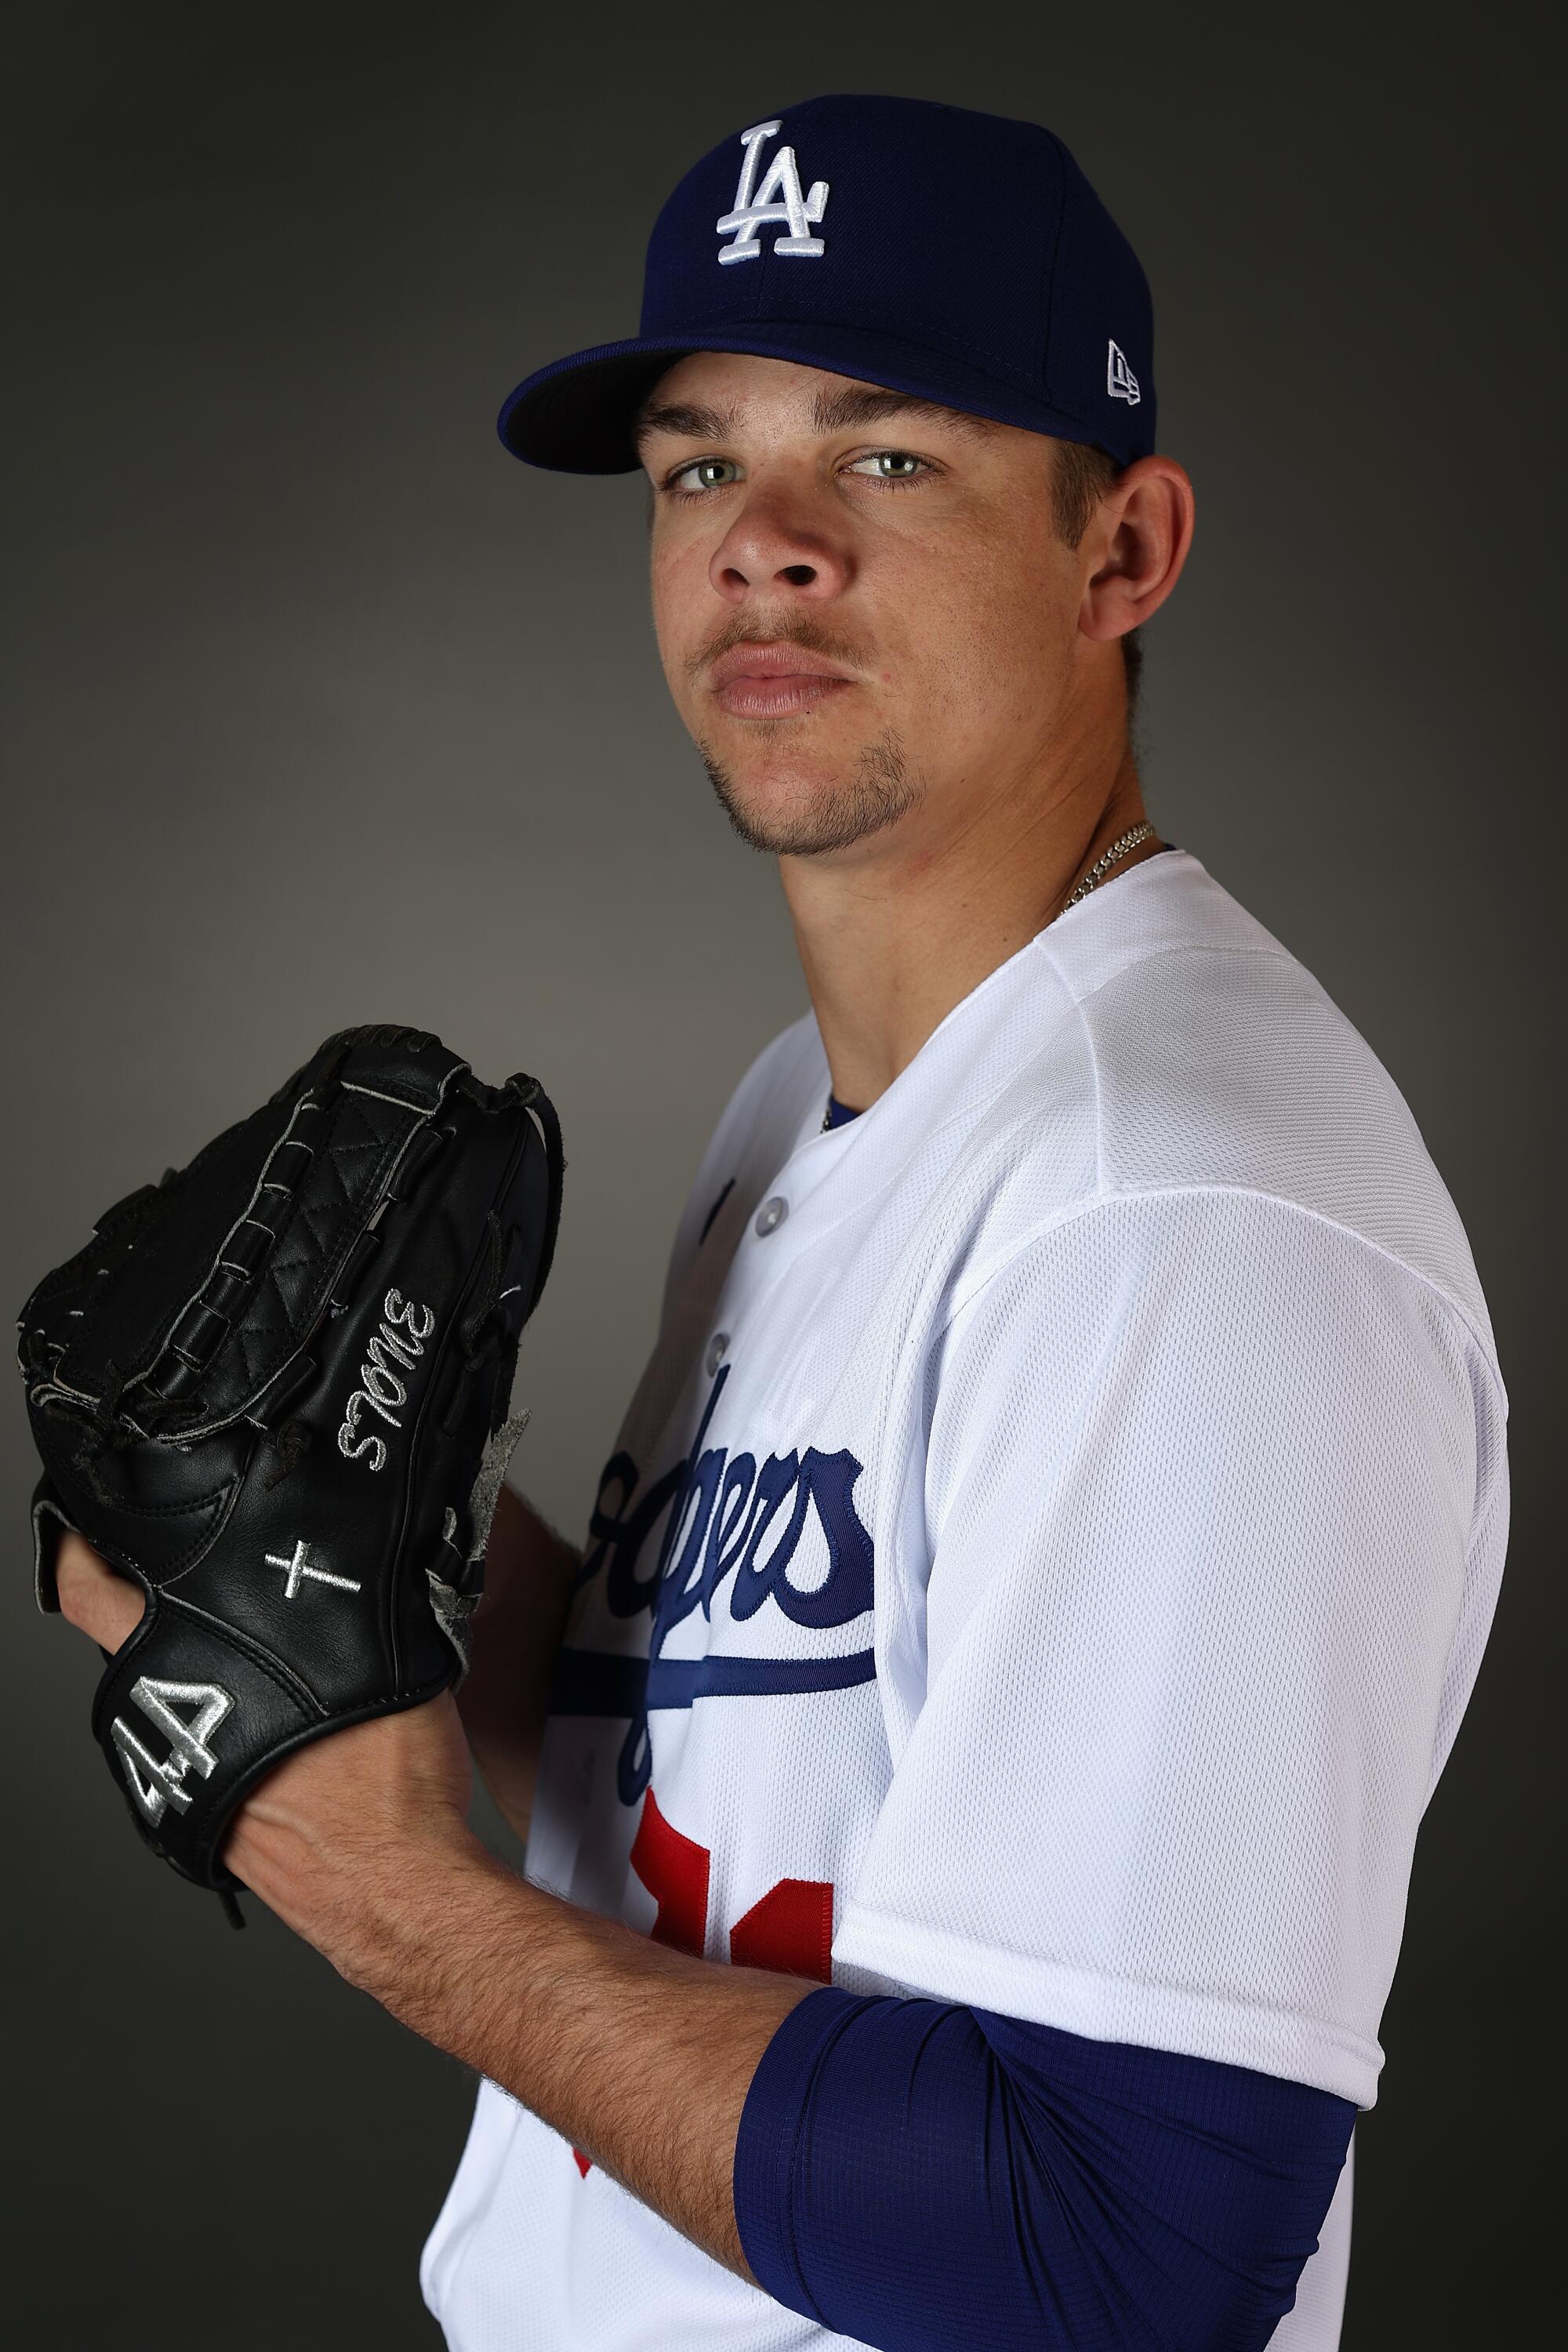 Dodgers' double-A rotation is epitome of their pitching pipeline